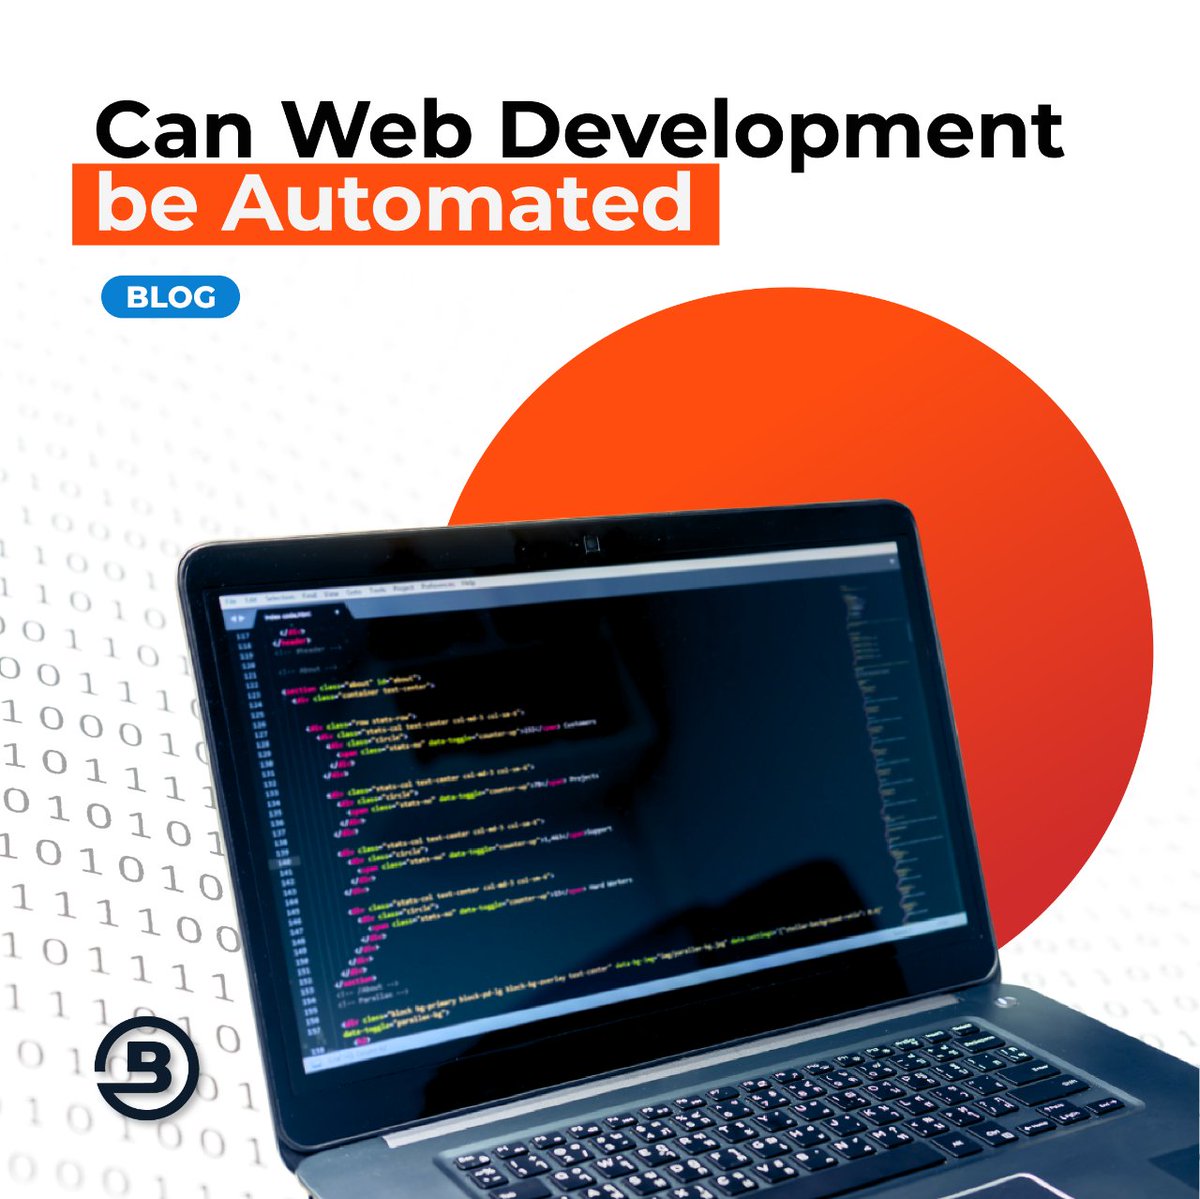 Relying solely on tools for web development can be a double-edged sword. You can speed up routine tasks but may compromise creative control.  In our latest blog, we discuss whether web development can be automated and how AI can potentially be a nuisance in disguise. #brandiron